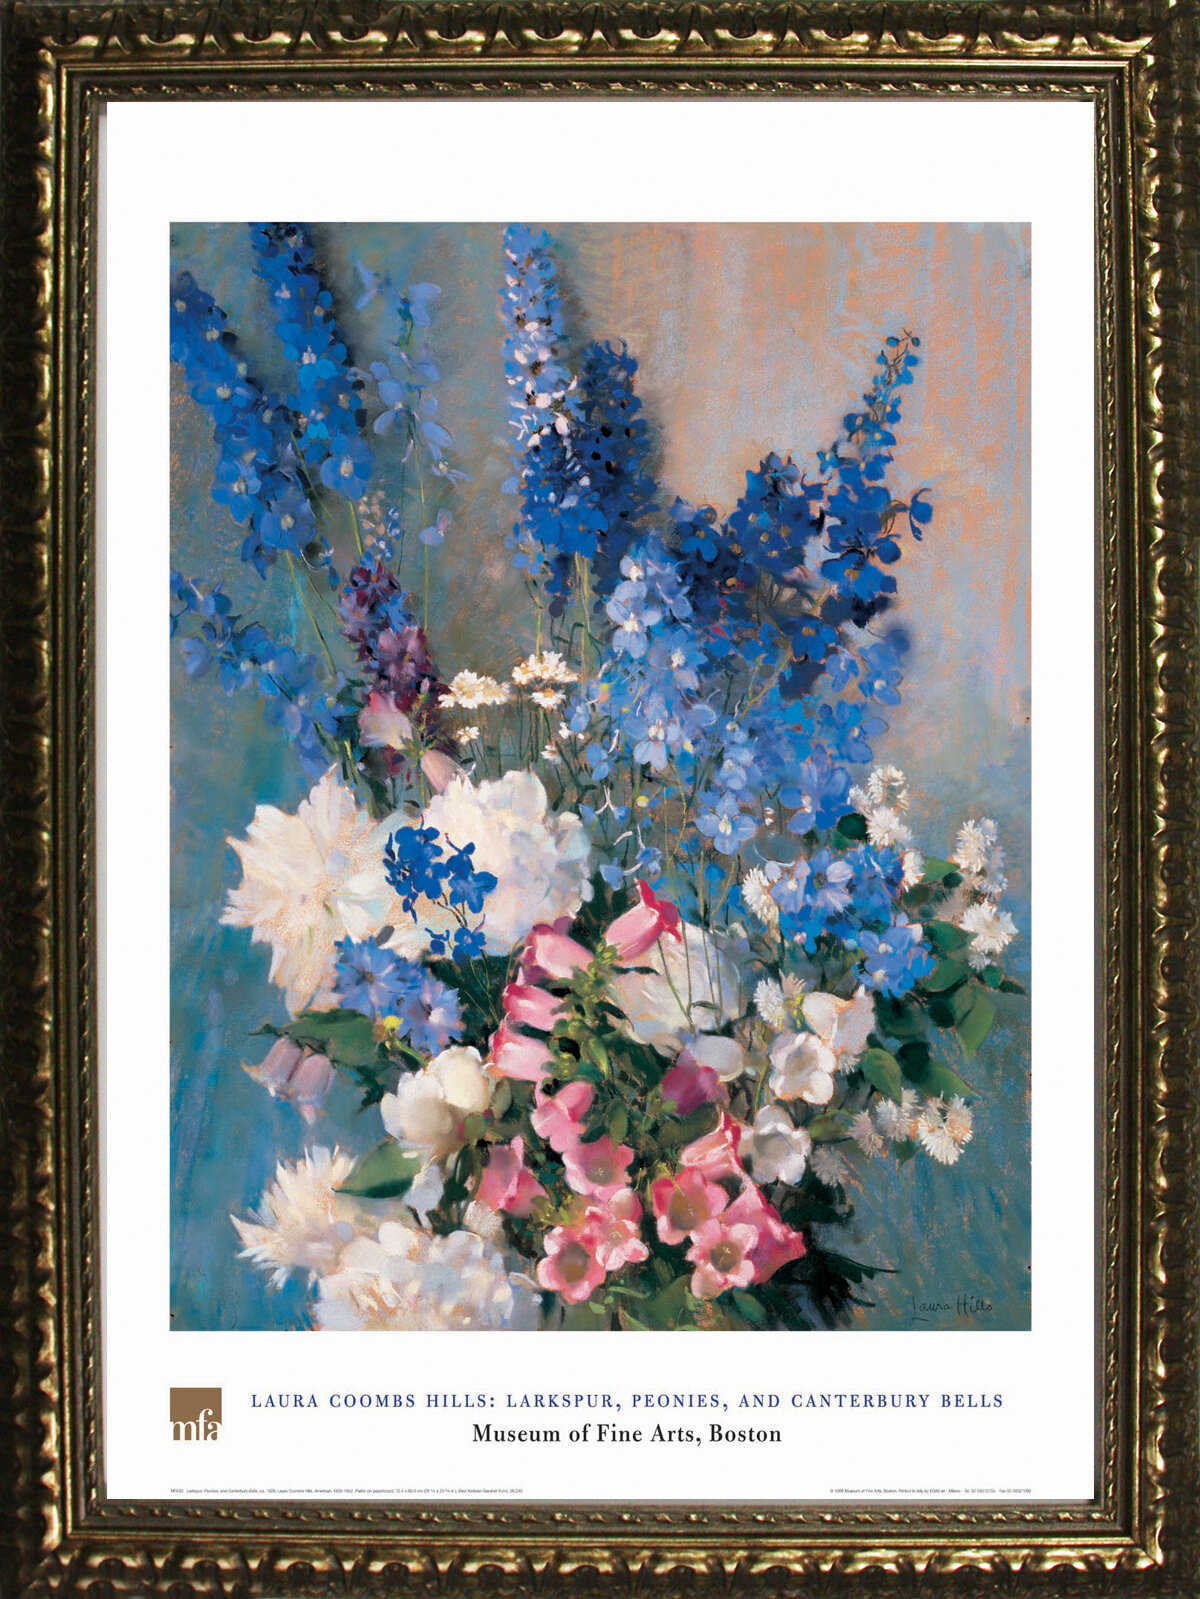 Buy Art For Less Museum Masters Larkspur Peonies And Canterbury Bells By Laura Coombs Hills Framed Painting Print Wayfair